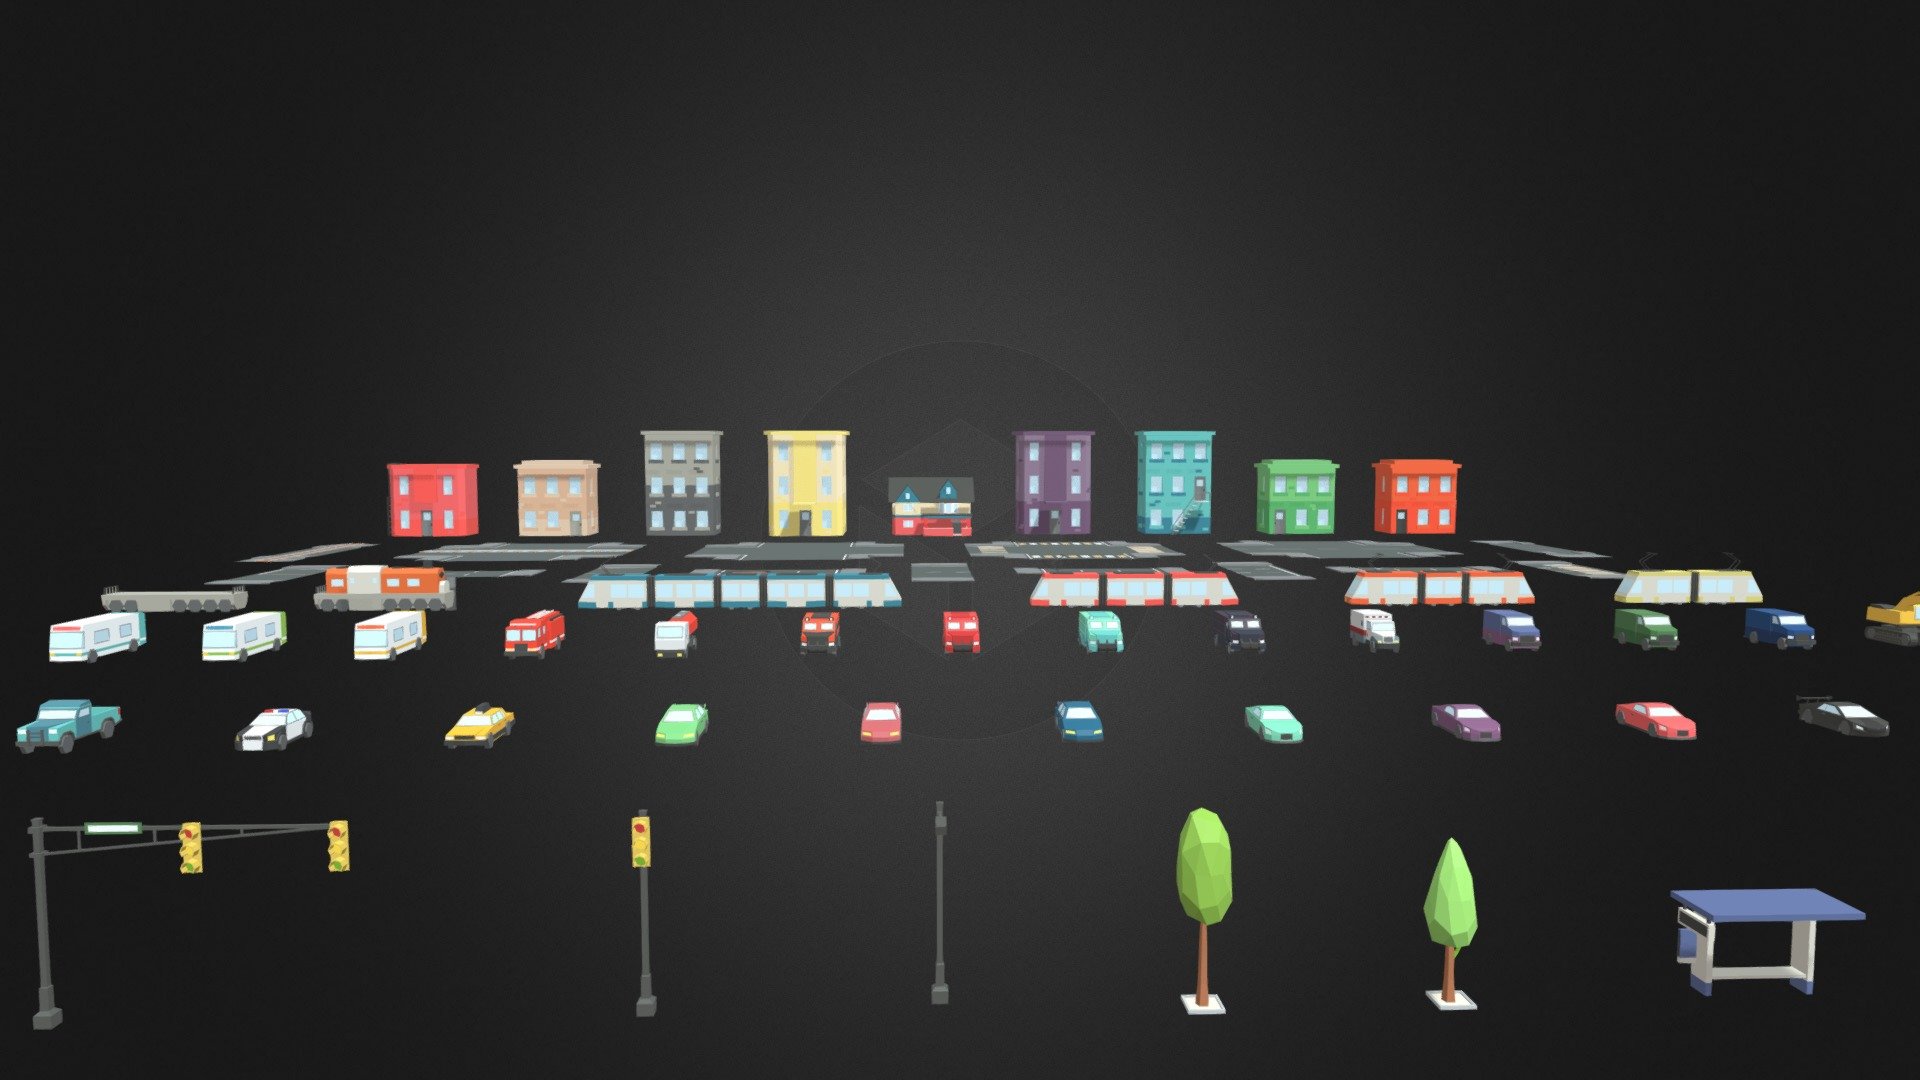 Low Poly Simple Urban City 3D Asset Pack is perfect for creating Mobile &amp; VR Games! 

What's Inside?




90+ Game Ready Low Poly Models

Carefully Made in Cinema 4D

Clean Hierarchy

Clean Topology

Stylized Low Poly Models

What Kind of Models?




35 Different Vehicles: main hero cars, sport cars, trucks, buses, emergency vehicles (police, fire truck, ambulance)

35 Different Street Props: road signs, bus stop, trees, trash, traffic lifgts

15 Road Paths: railways, crossroads, etc.

9 Beautiful Buildings: city houses, unique cottage house

Formats




.fbx (+ all separated models)

.c4d (native) - ArtStation

Project Information




Animated: NO

Low Poly: YES

Materials: YES

Rigged: NO

Textured: YES

UV Layout: YES

Created in: Cinema 4D

Feedback

If you have any questions about my models or if you need a specific requirement for a model, please feel free to contact me: syomapozdeev@gmail.com - Free Low Poly Simple Urban City 3D Asset Pack - Download Free 3D model by Syoma Pozdeev (@moldydoldy) 3d model